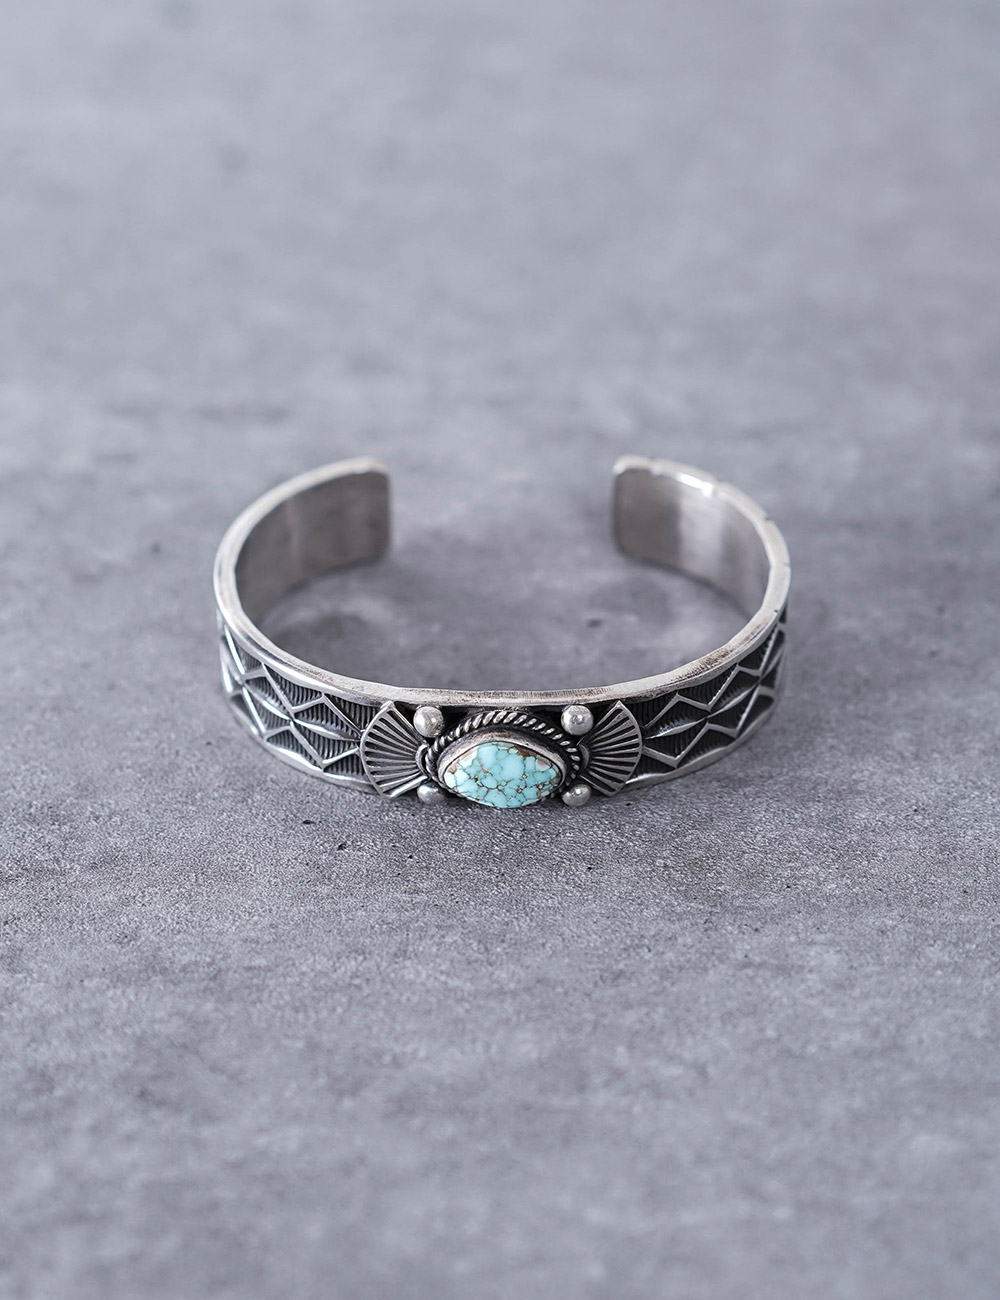 NATIVE AMERICAN JEWELRY : Andy Cadman Silver w/Turquoise Bracelet